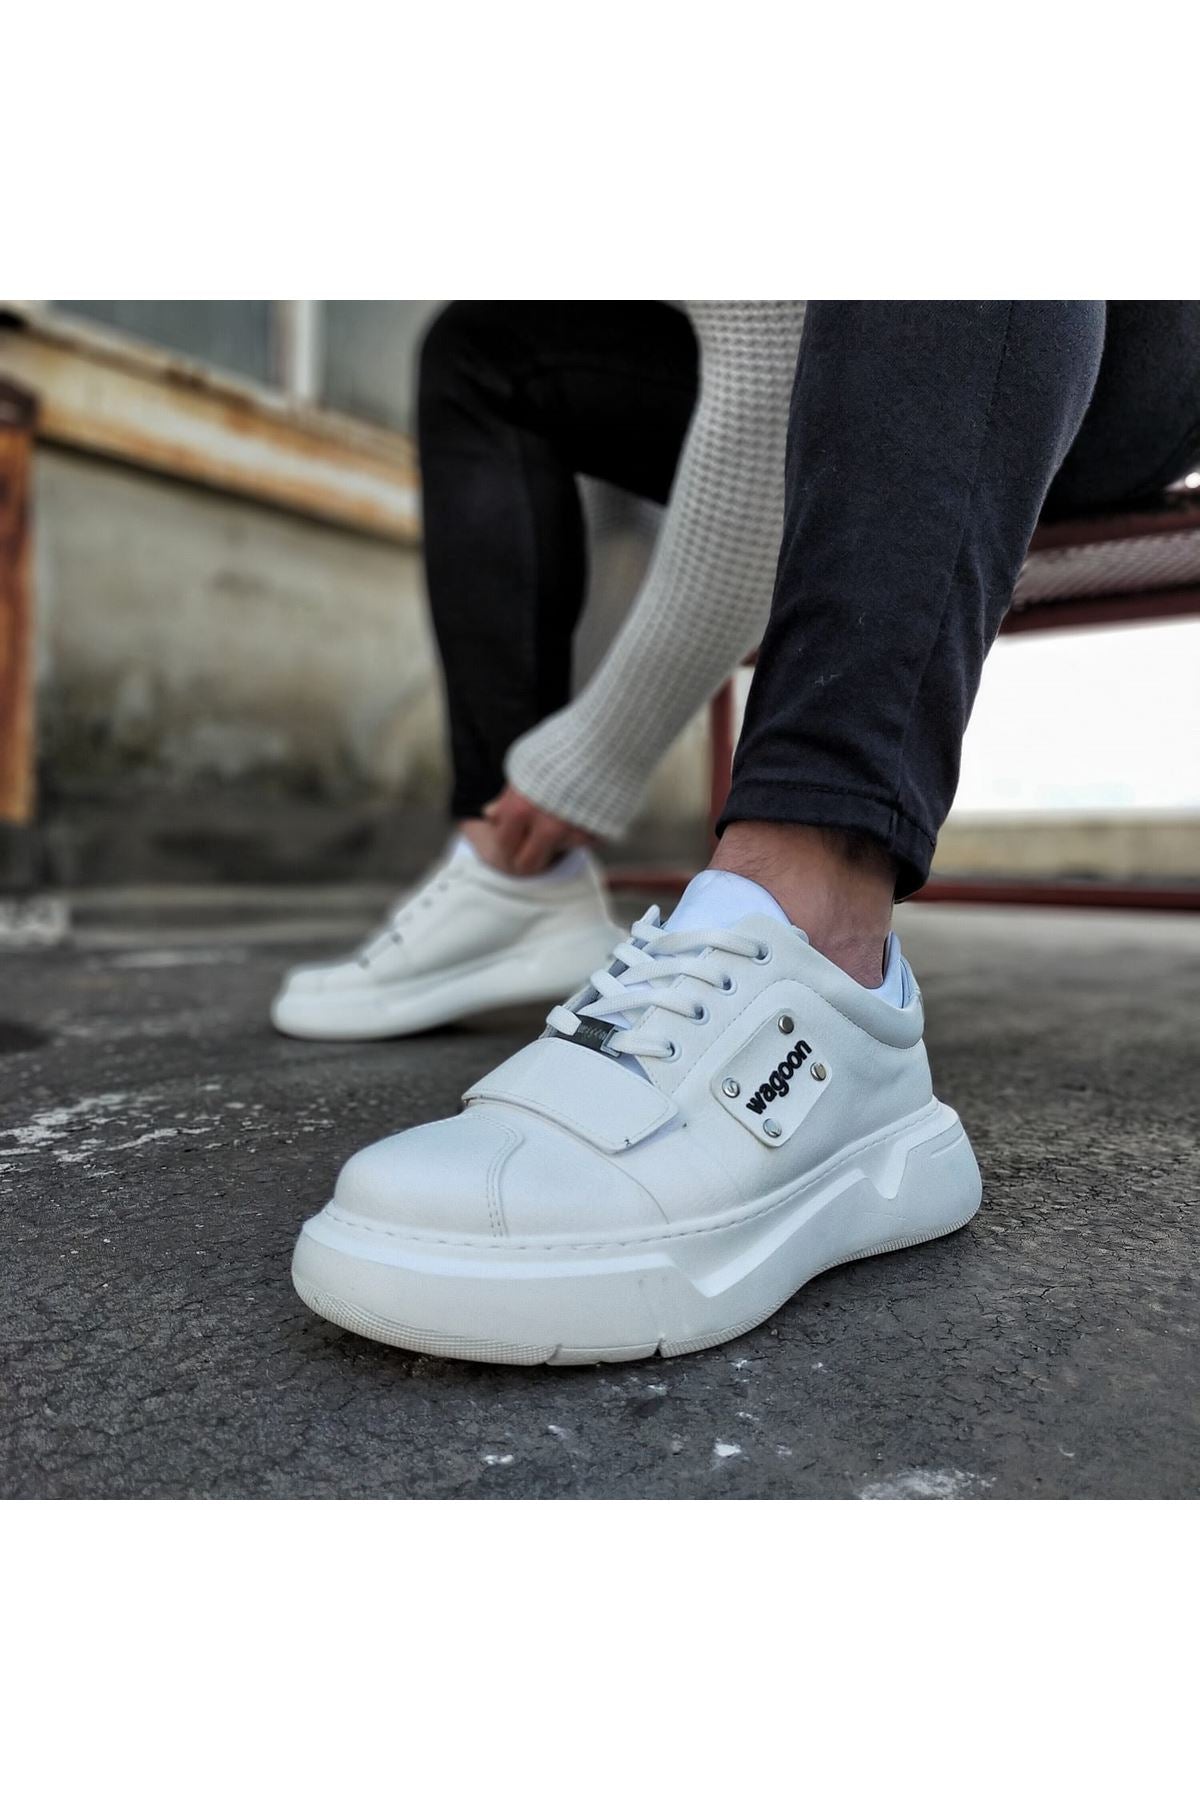 WG018 White High Sole Shoes - STREETMODE ™